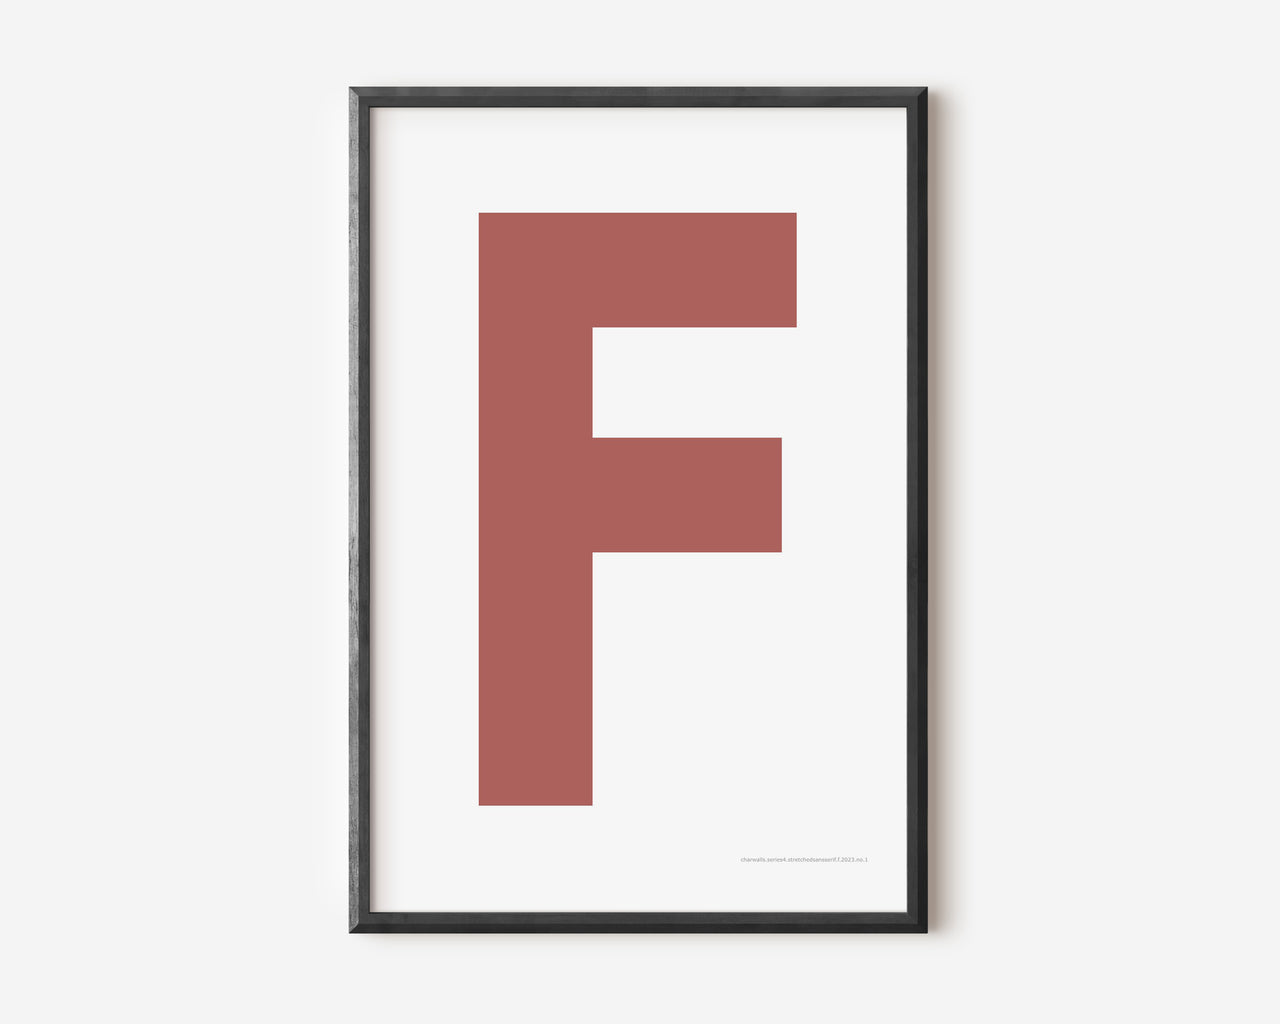 Modern art print with an uppercase Nantucket red letter F on a white background.